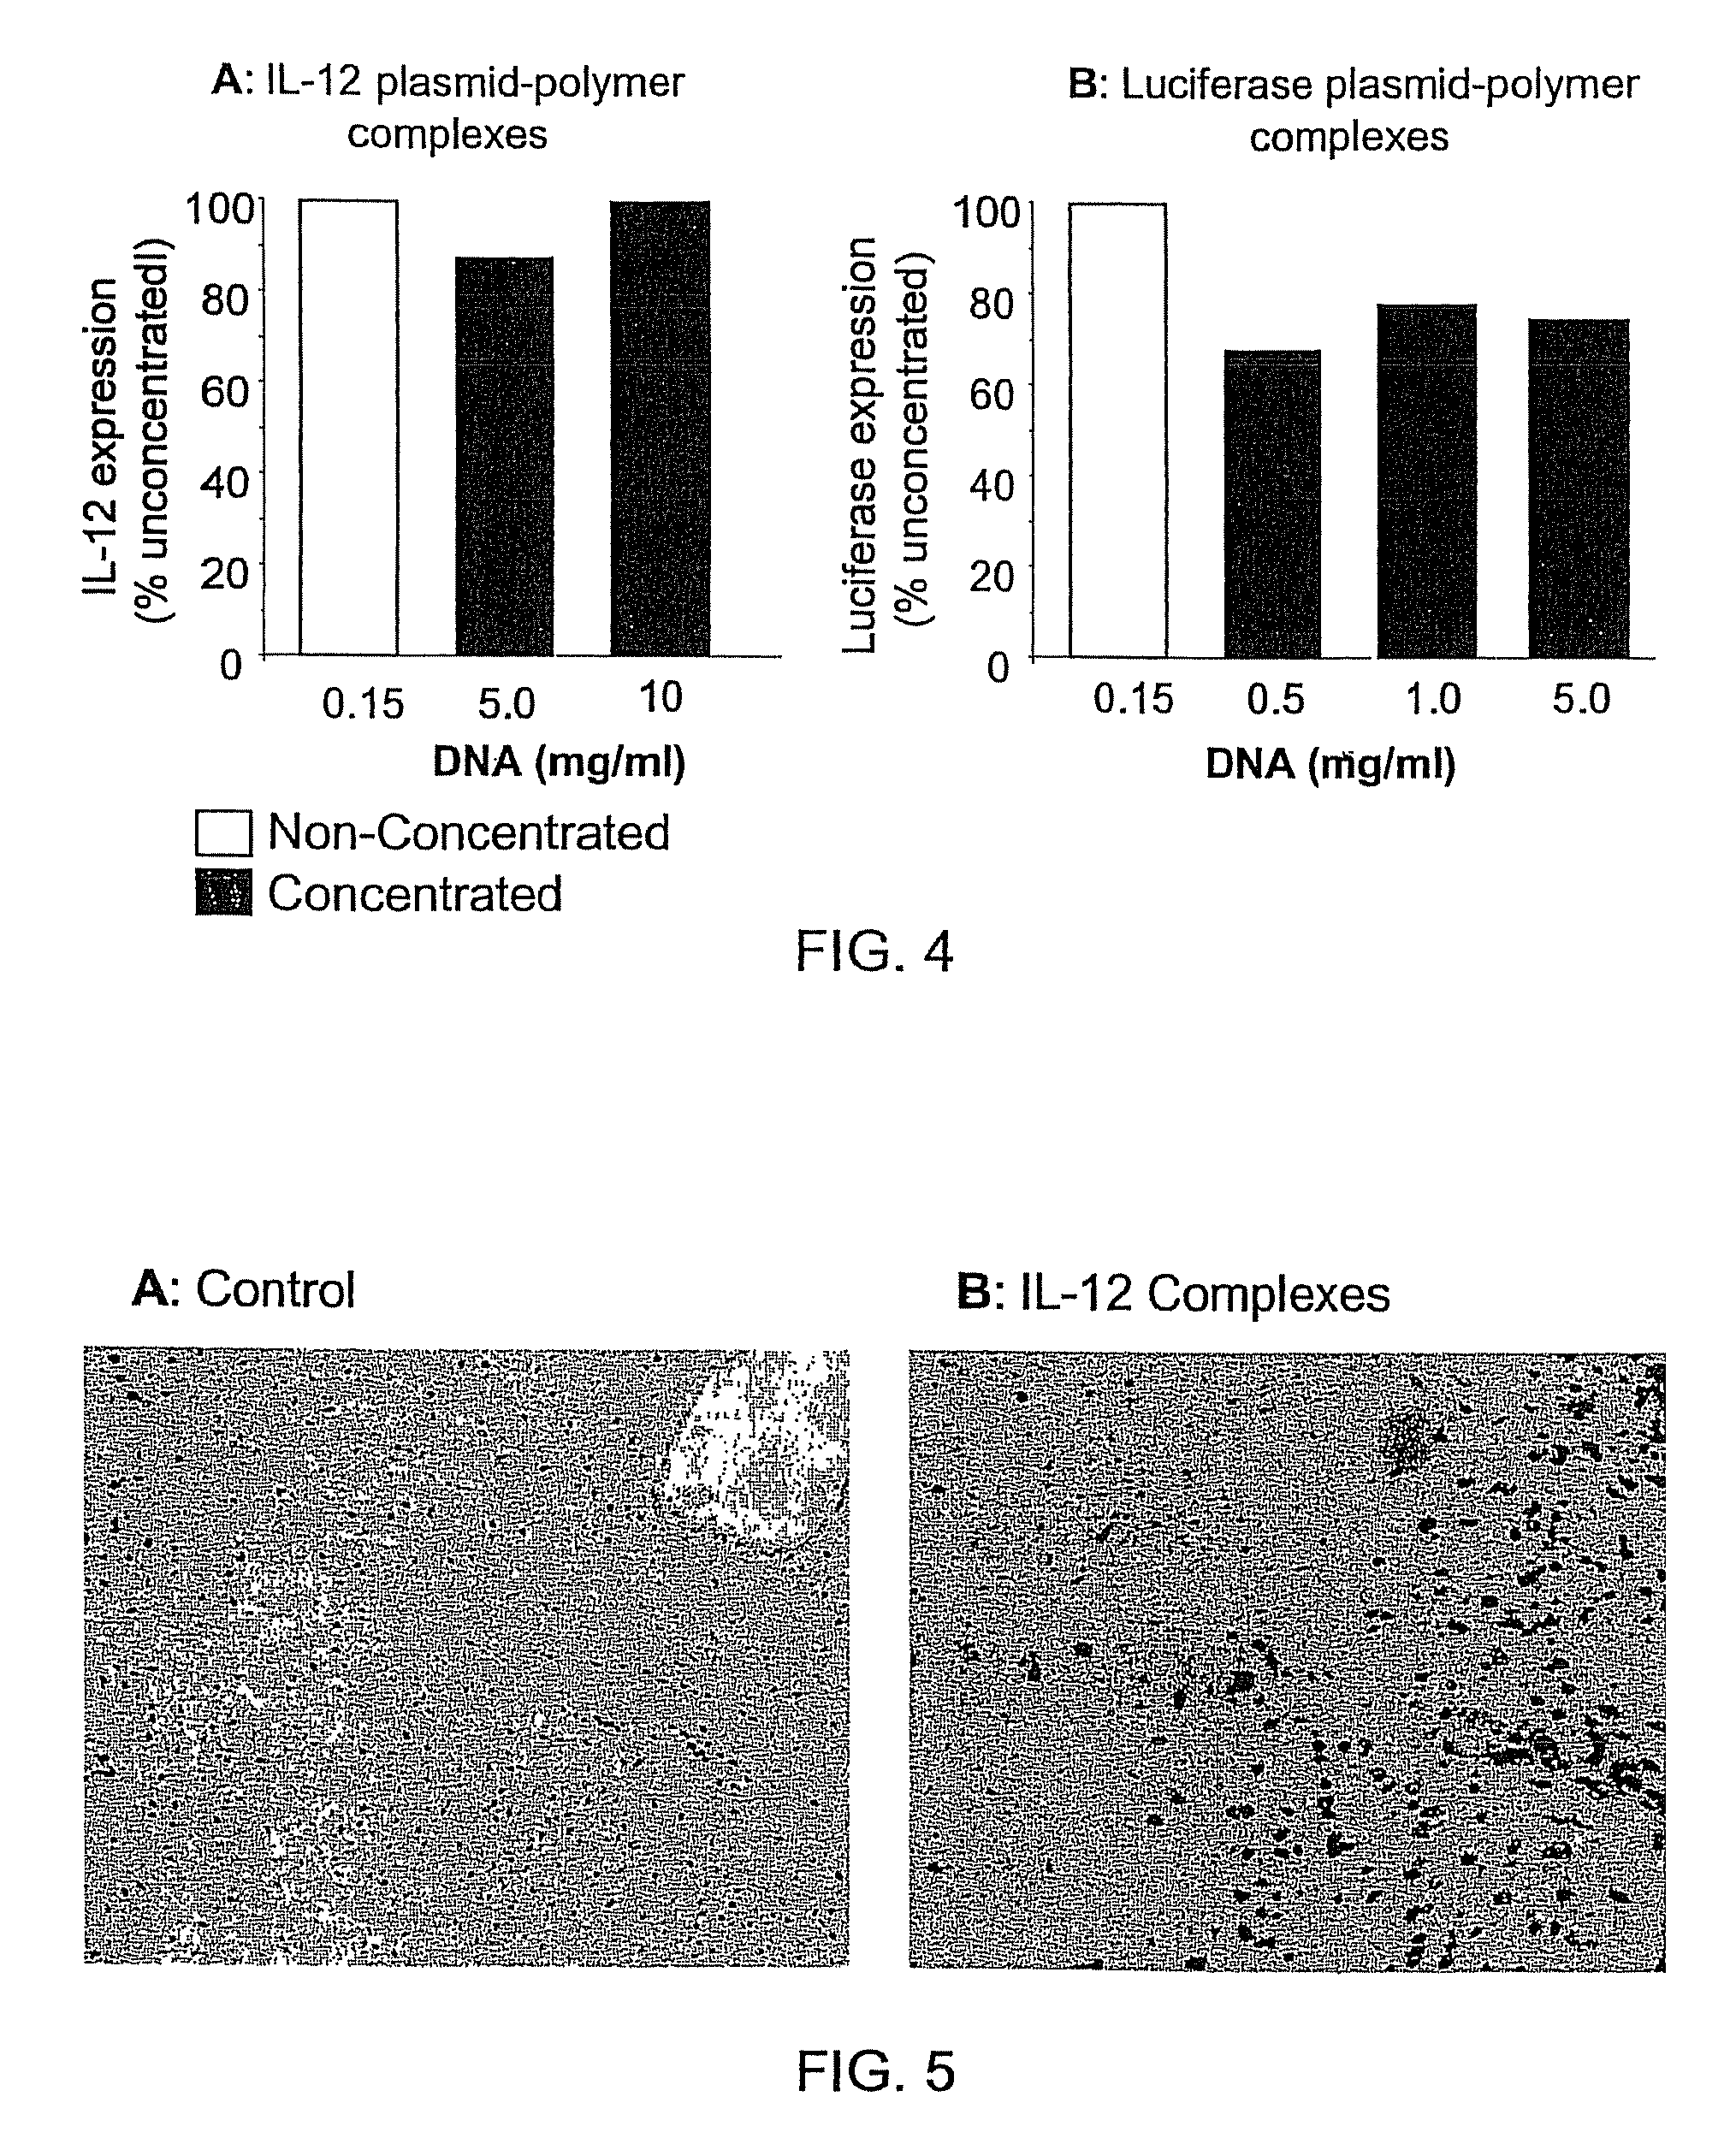 Nucleic acid-lipopolymer compositions